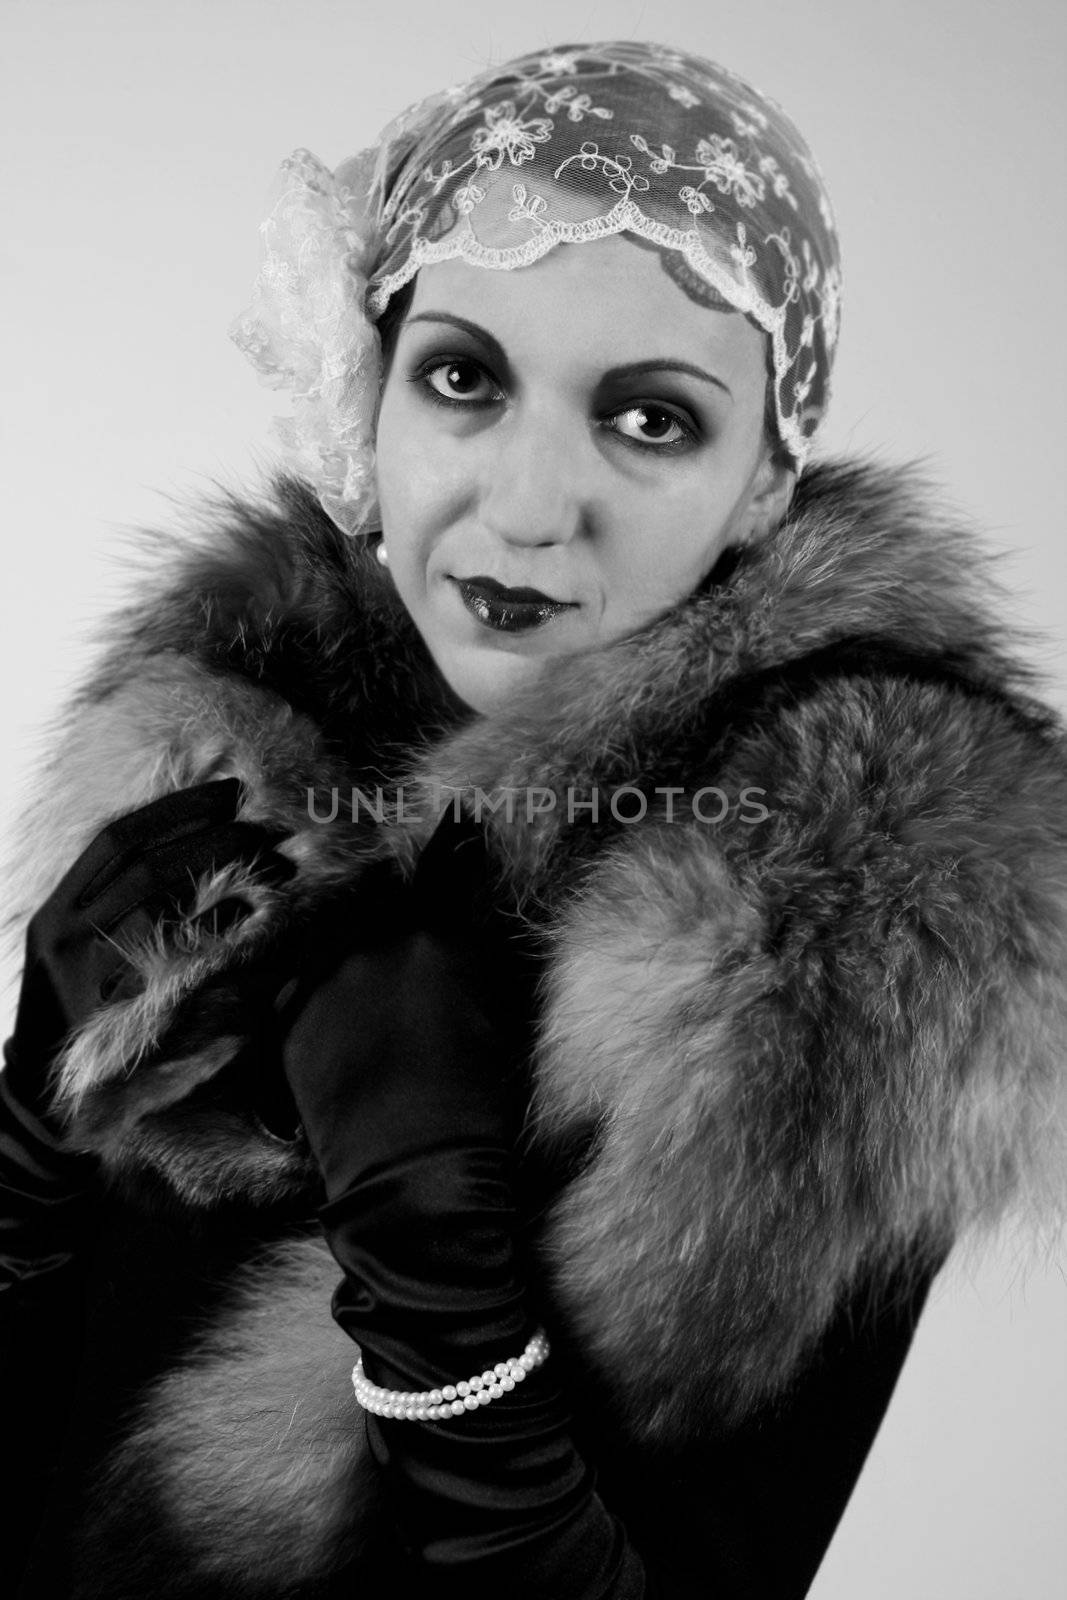 Retro styled fashion portrait of a young woman. Clothing and make-up in twenties style.